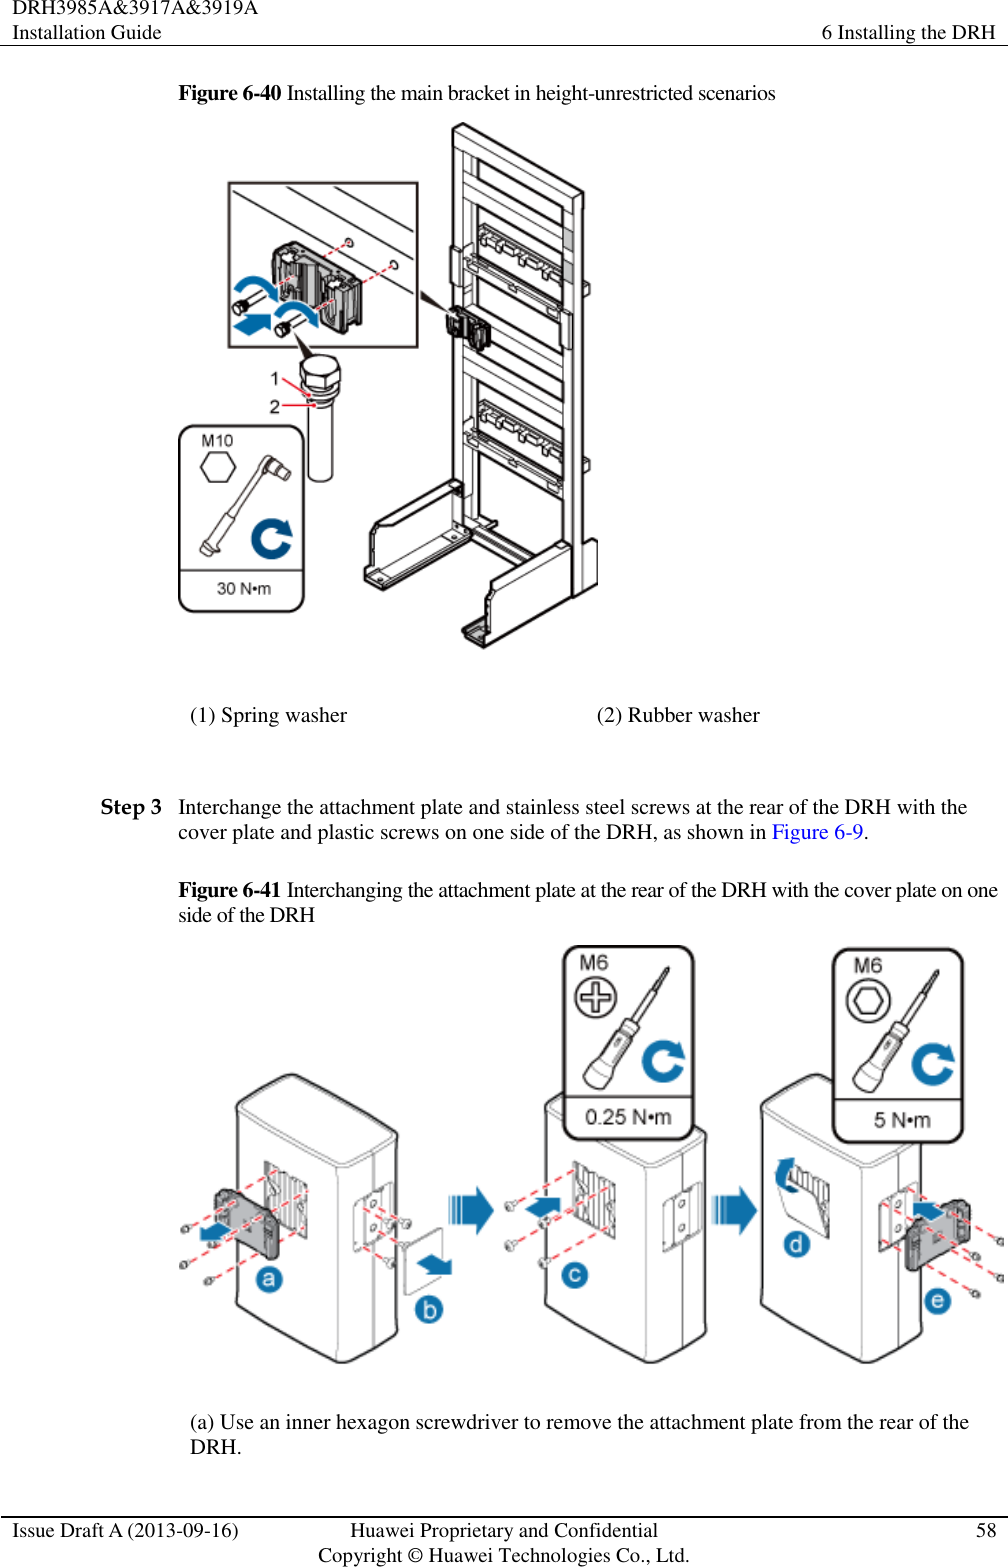 DRH3985A&amp;3917A&amp;3919A Installation Guide 6 Installing the DRH  Issue Draft A (2013-09-16) Huawei Proprietary and Confidential                                     Copyright © Huawei Technologies Co., Ltd. 58  Figure 6-40 Installing the main bracket in height-unrestricted scenarios  (1) Spring washer (2) Rubber washer  Step 3 Interchange the attachment plate and stainless steel screws at the rear of the DRH with the cover plate and plastic screws on one side of the DRH, as shown in Figure 6-9. Figure 6-41 Interchanging the attachment plate at the rear of the DRH with the cover plate on one side of the DRH  (a) Use an inner hexagon screwdriver to remove the attachment plate from the rear of the DRH. 